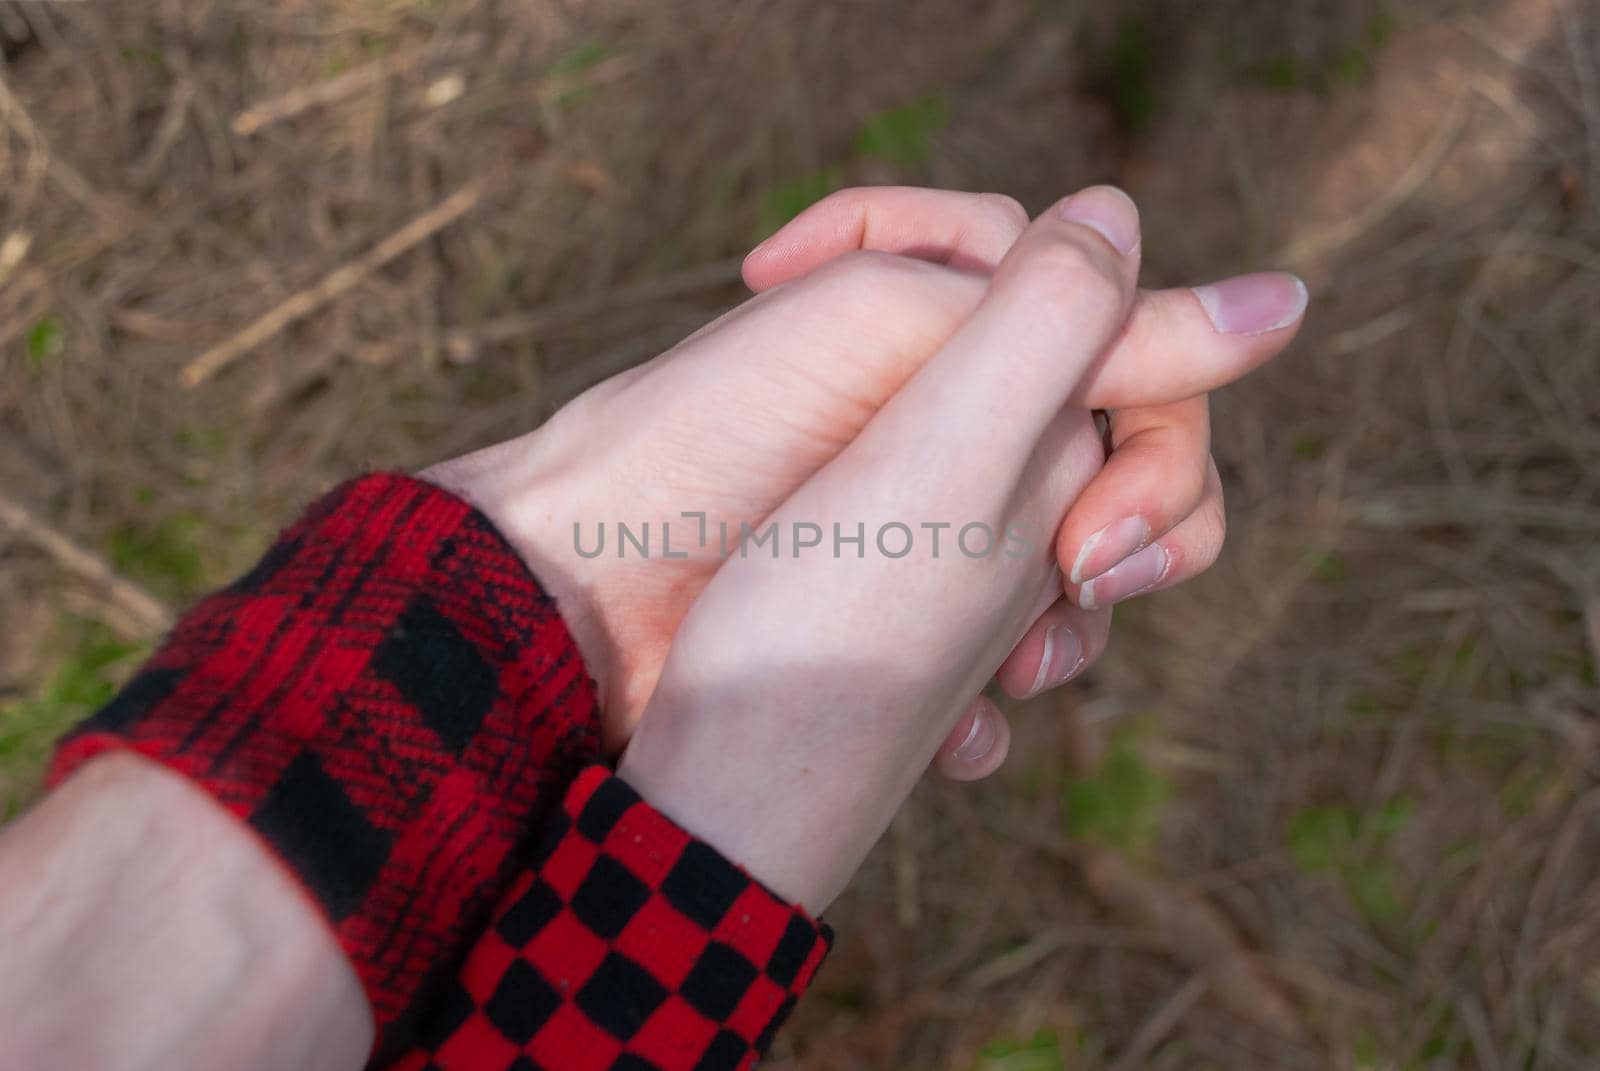 Punk emo couple holding hands, wearing red checkered armbinde while walking outdoors in the forest, close-up